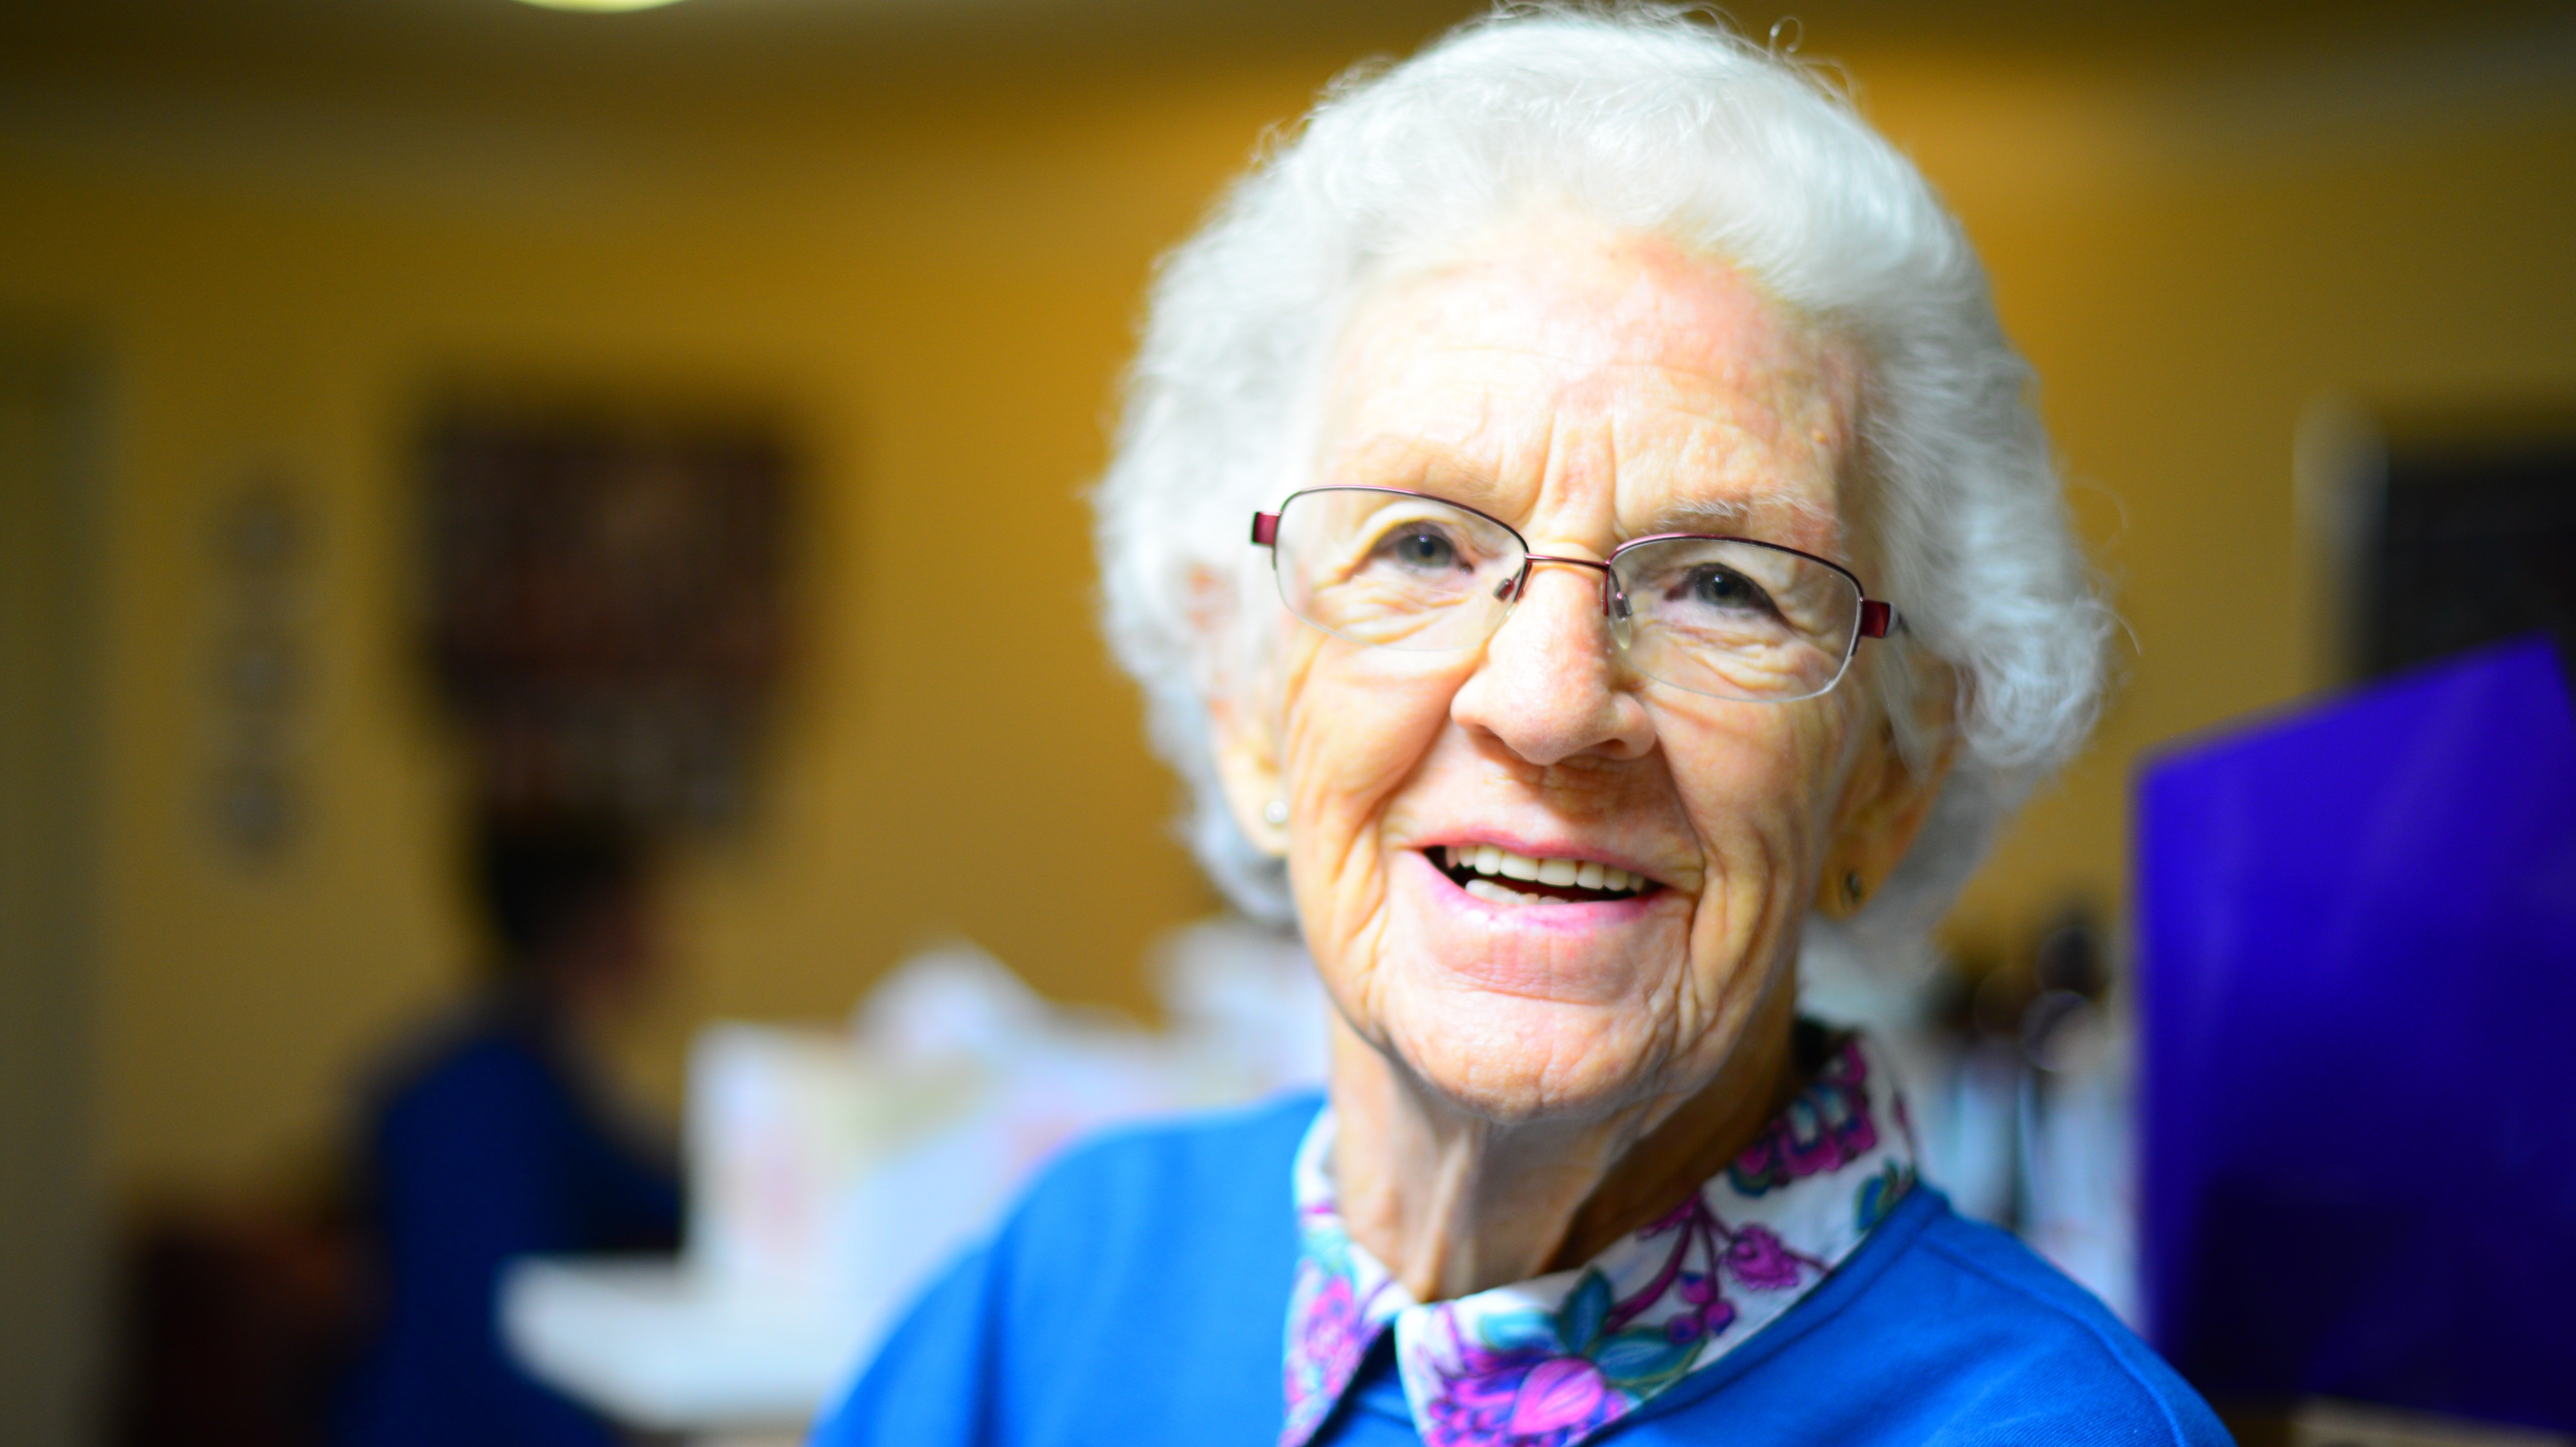 An old woman smiling. | Source: Pexels